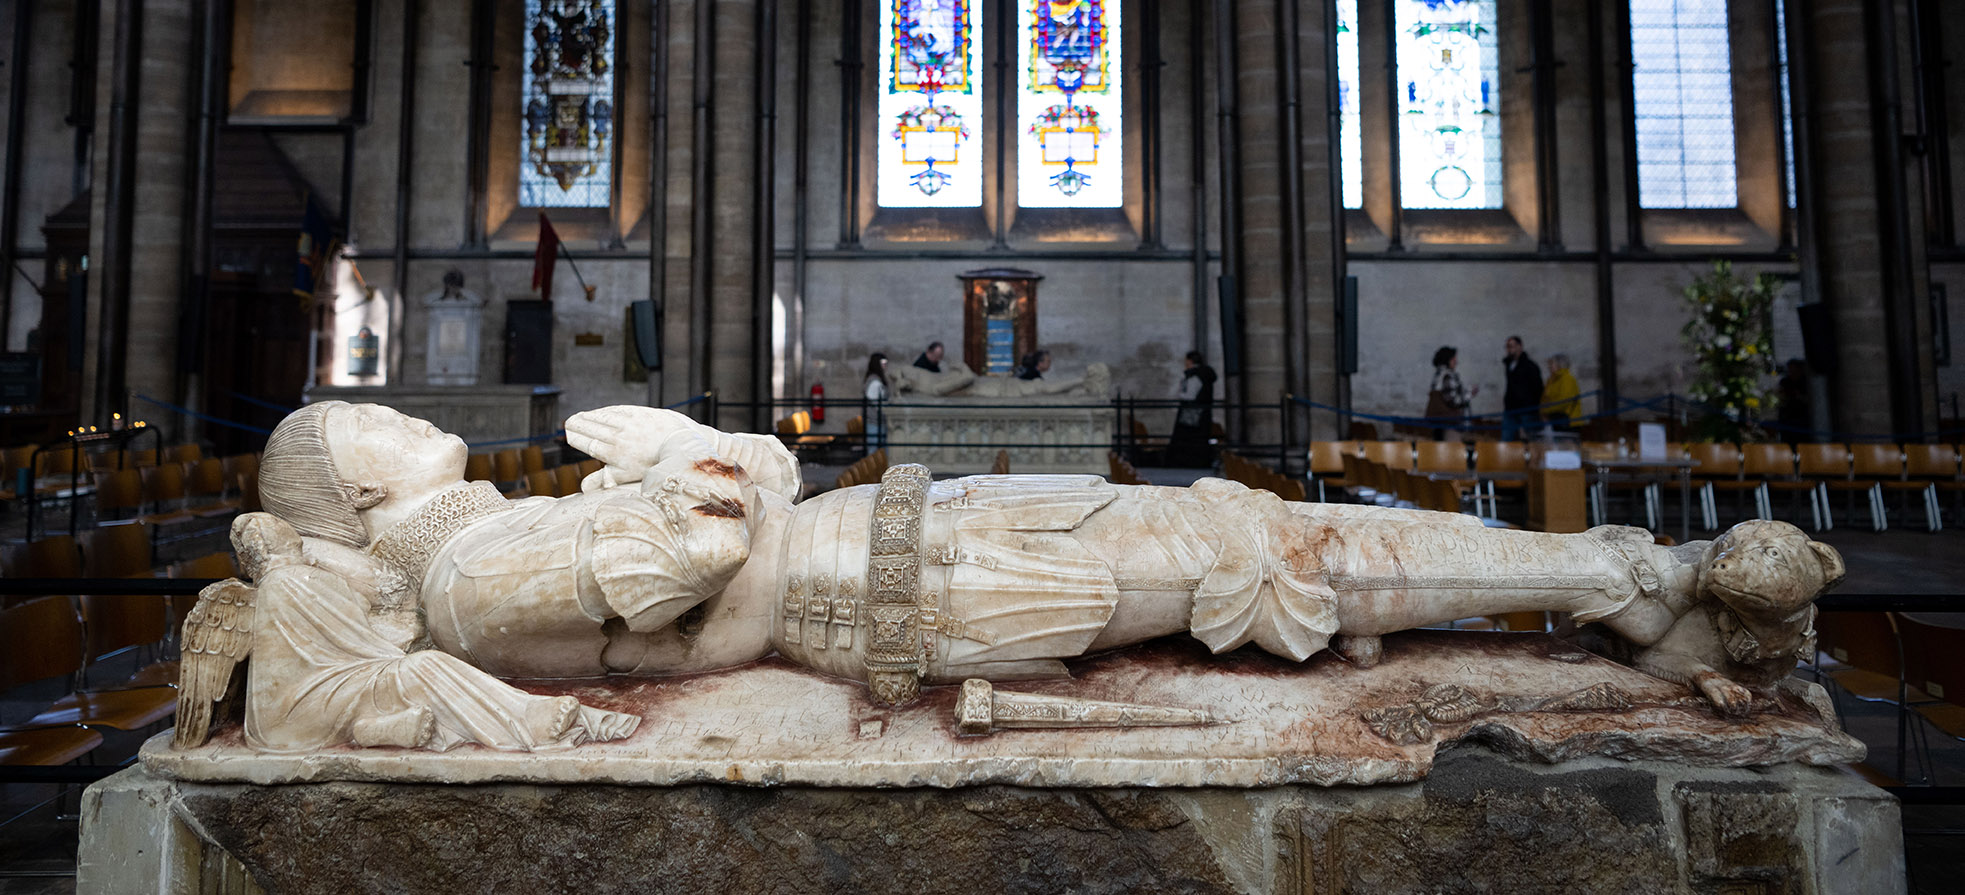 Tomb inside Salisbury Cathedral